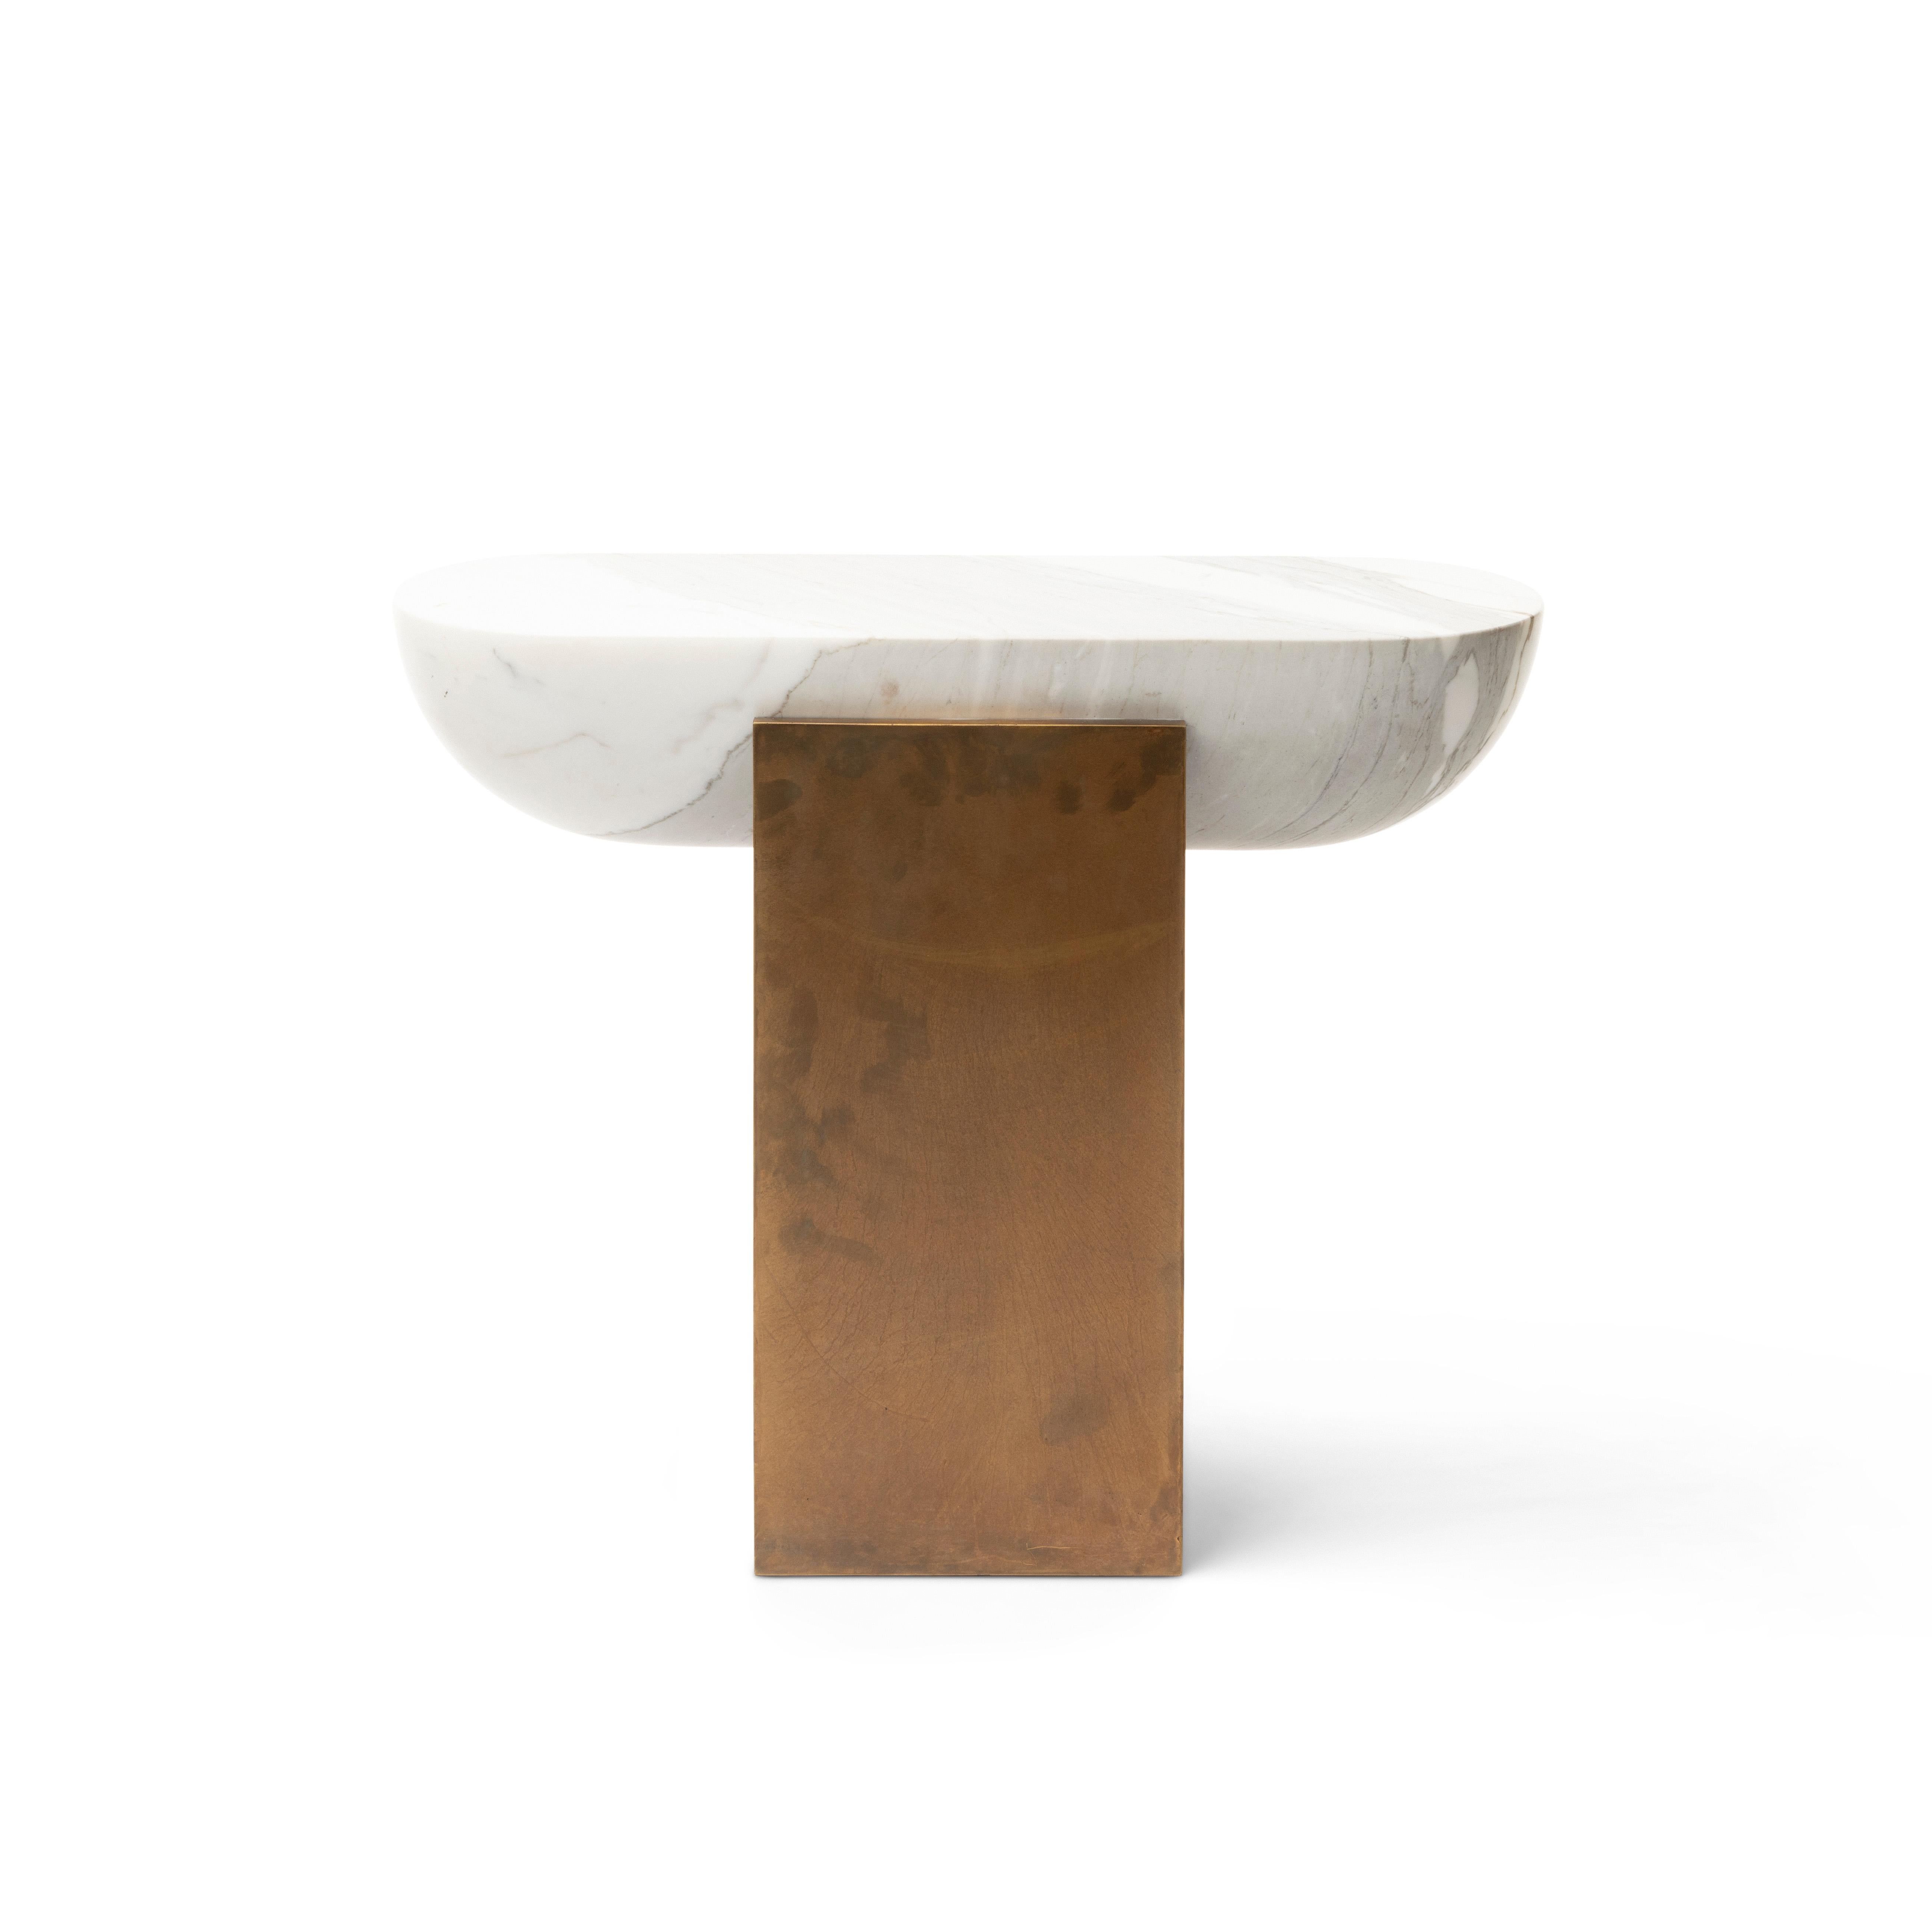 Honed Italian Calacatta marble cupped by a patinated brass plinth; the PILL’S charm is in the justice of its proportions, and the vibrations of its materials. Intentionally slender, the PILL's silhouette allows it to make a statement in the